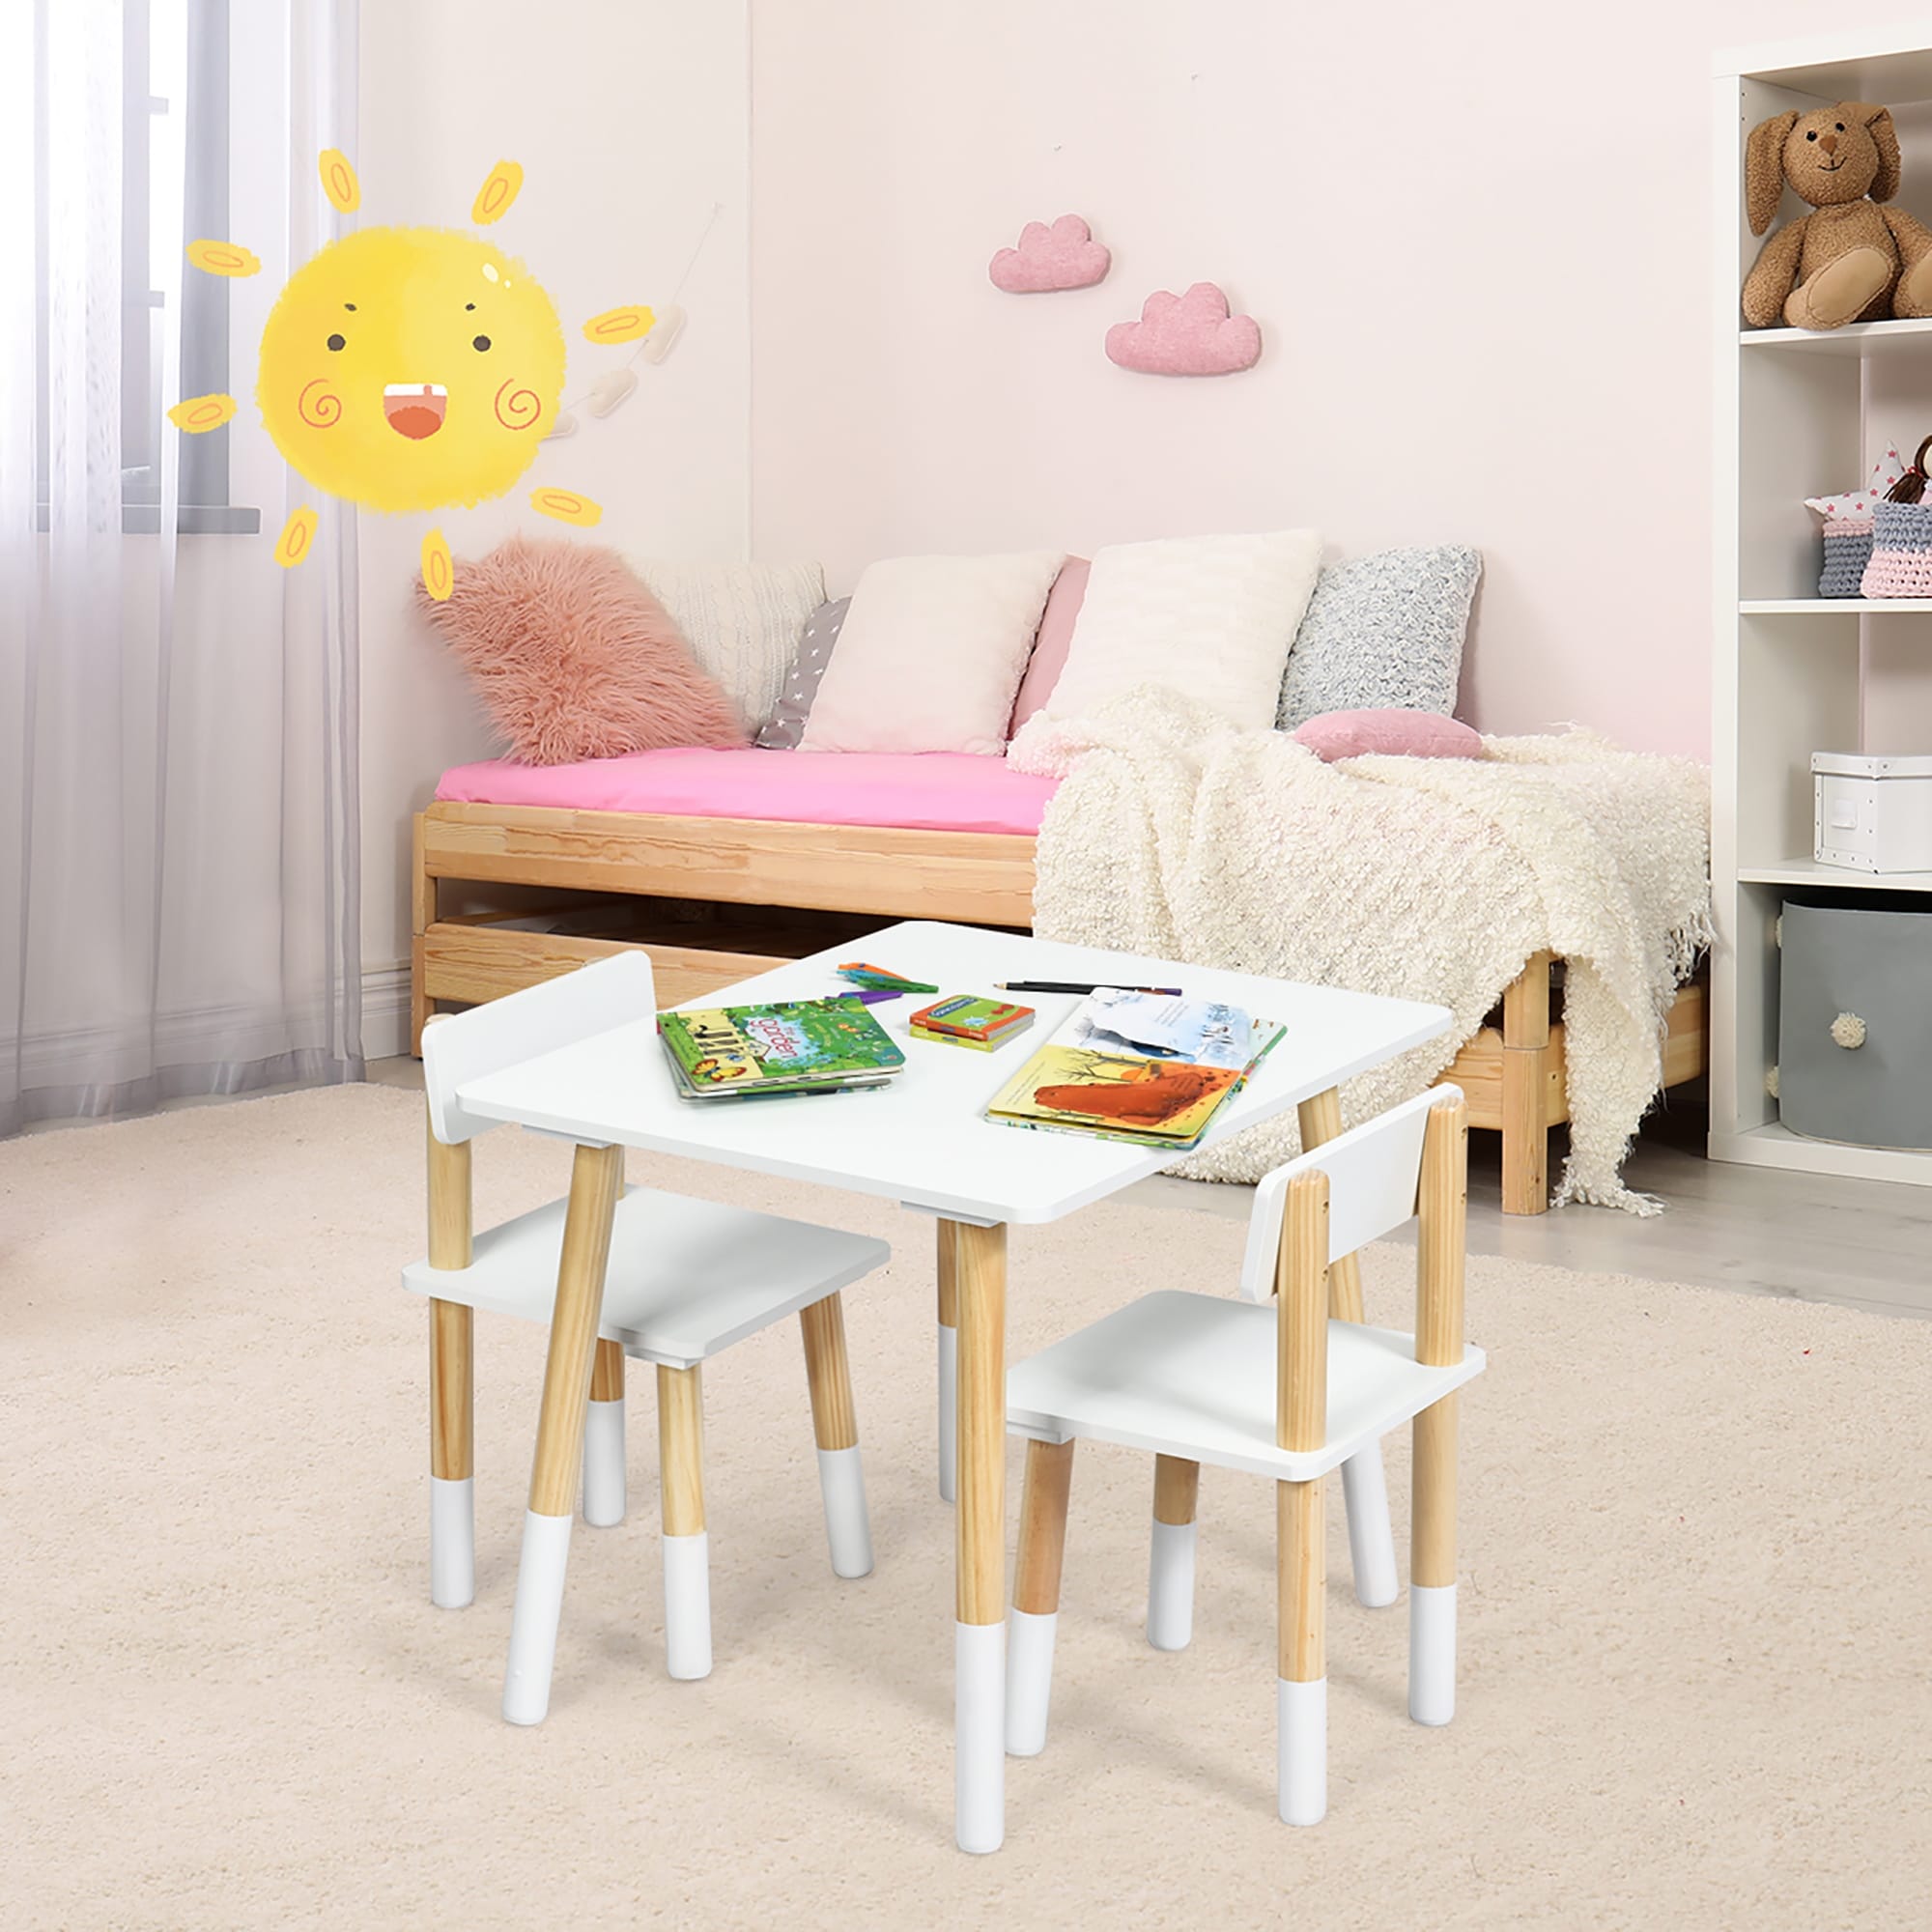 https://ak1.ostkcdn.com/images/products/is/images/direct/cf49753f03e7cf2acdc427367225646e708a62e3/Costway-Kids-Wooden-Table-%26-2-Chairs-Set-Children-Activity-Table-Set.jpg